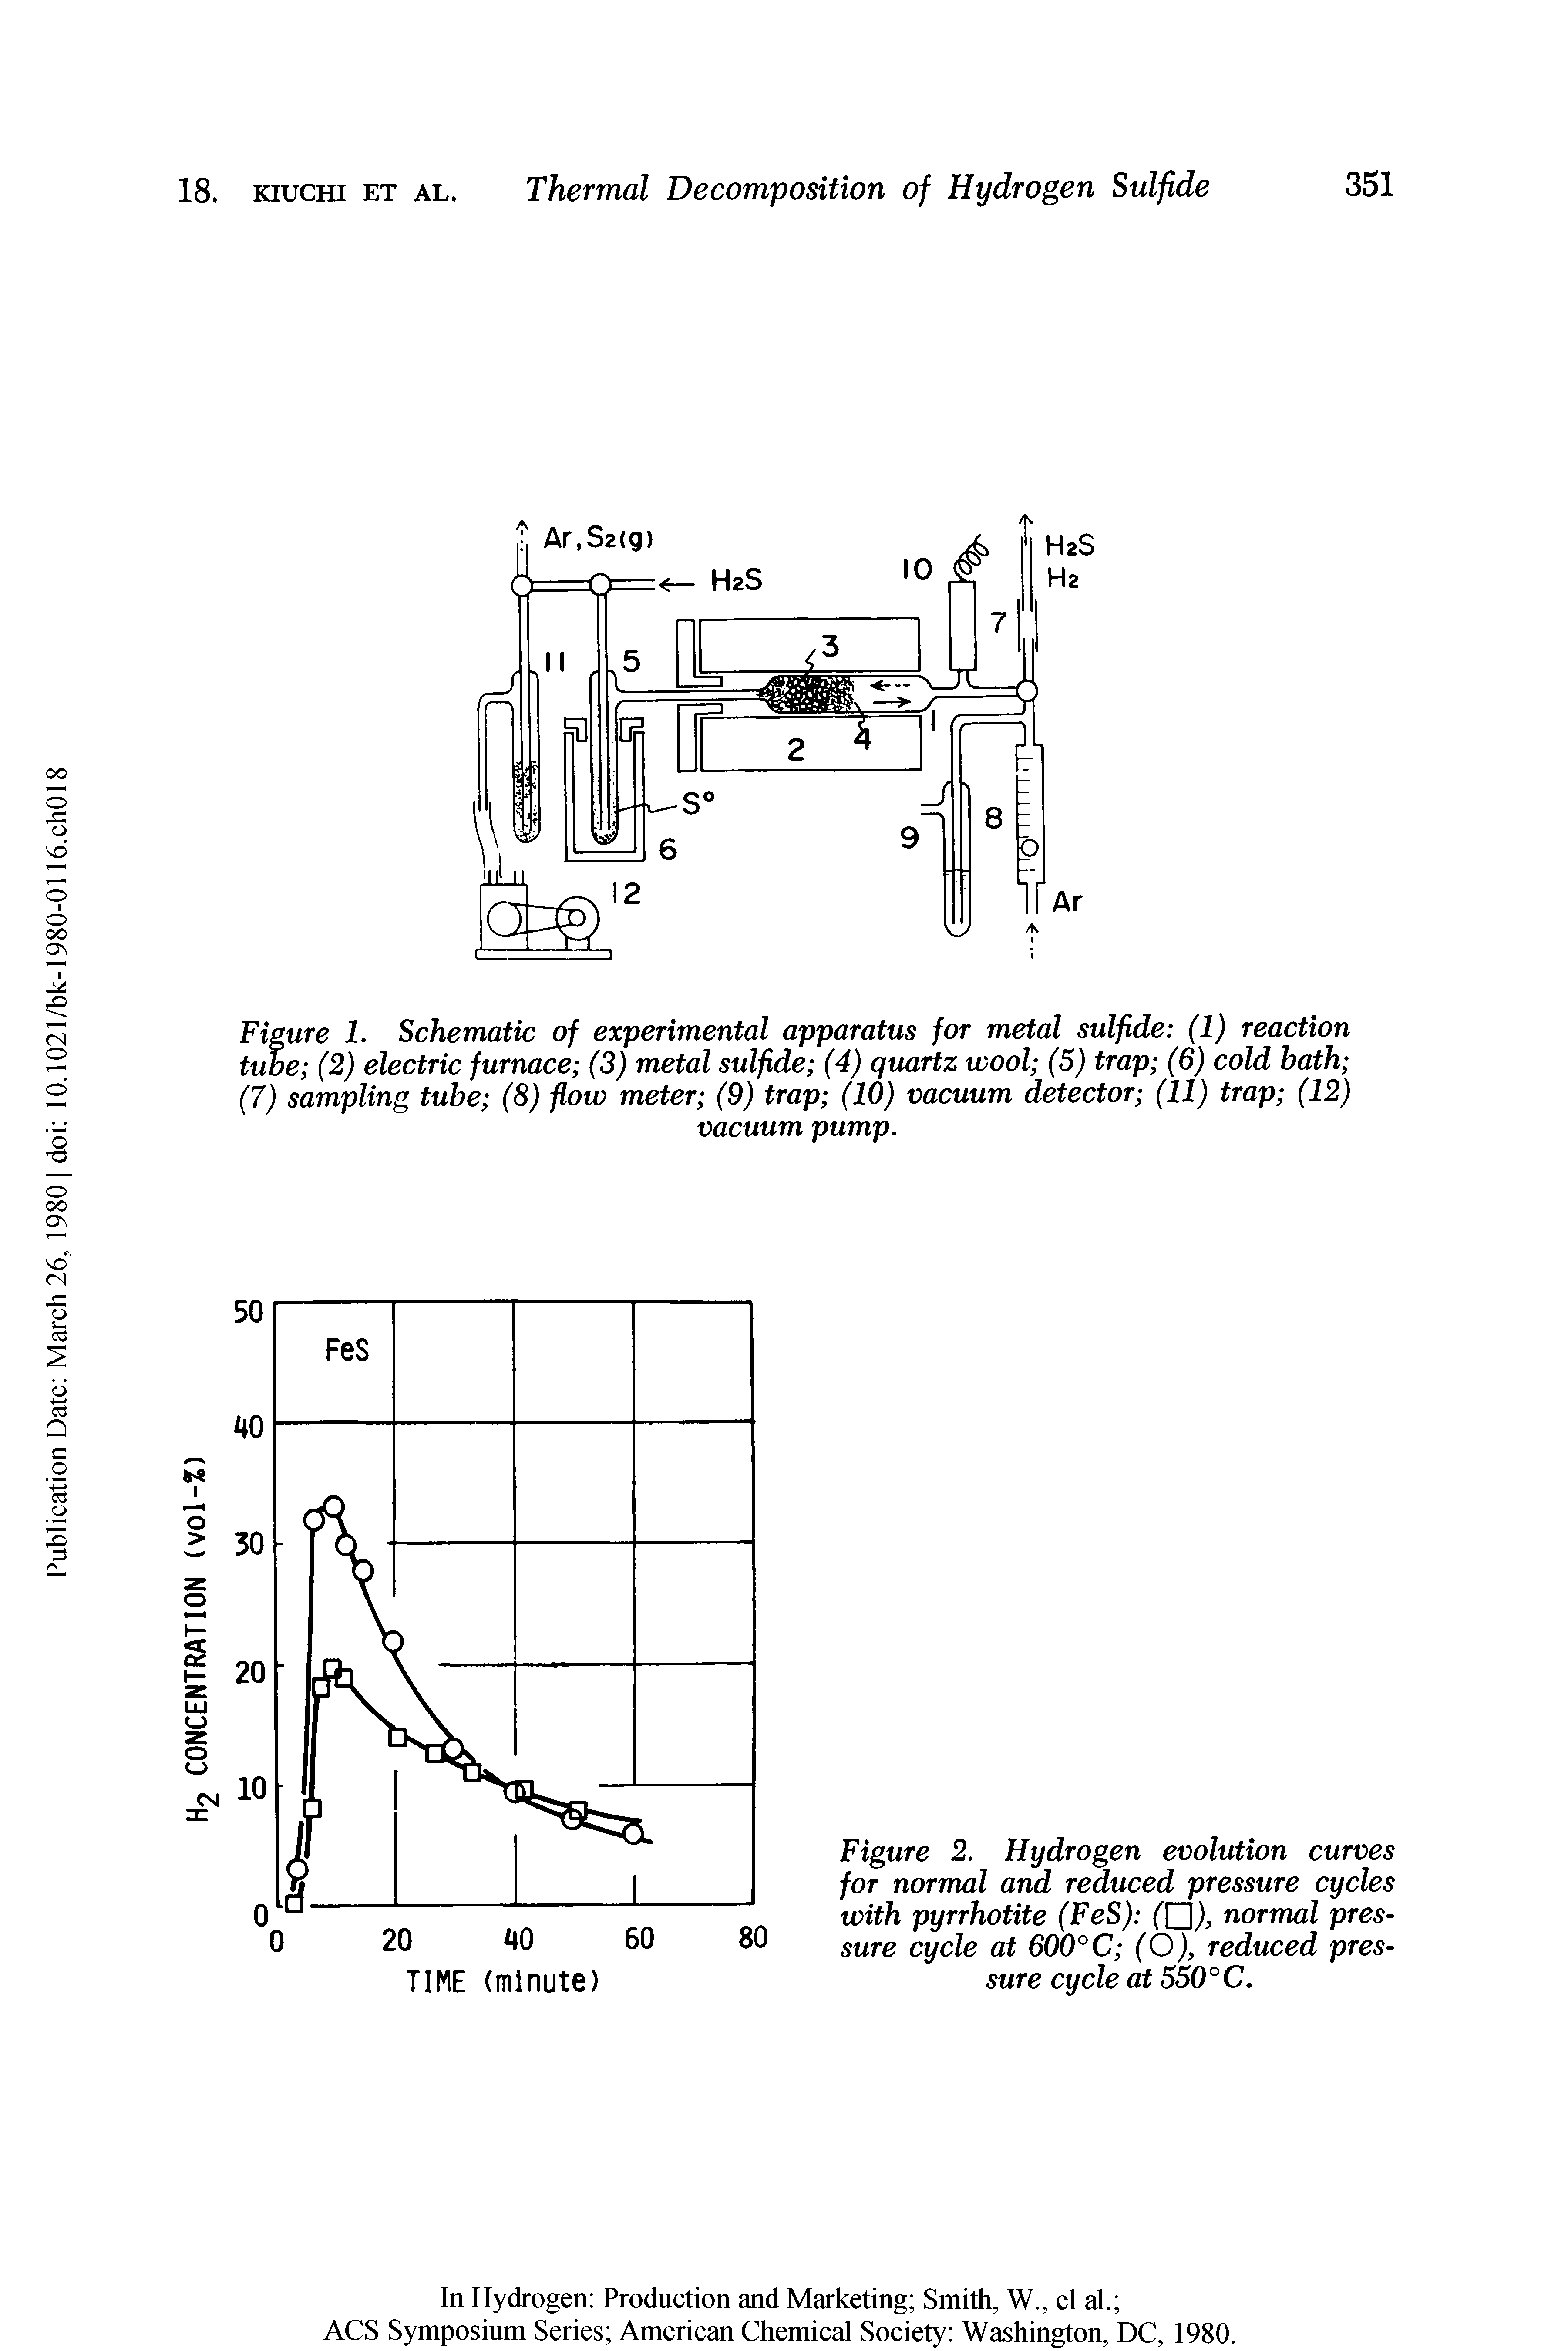 Figure 2. Hydrogen evolution curves for normal and reduced pressure cycles with pyrrhotite (FeS) ( ), normal pressure cycle at 600°C (O), reduced pressure cycle at 550°C.